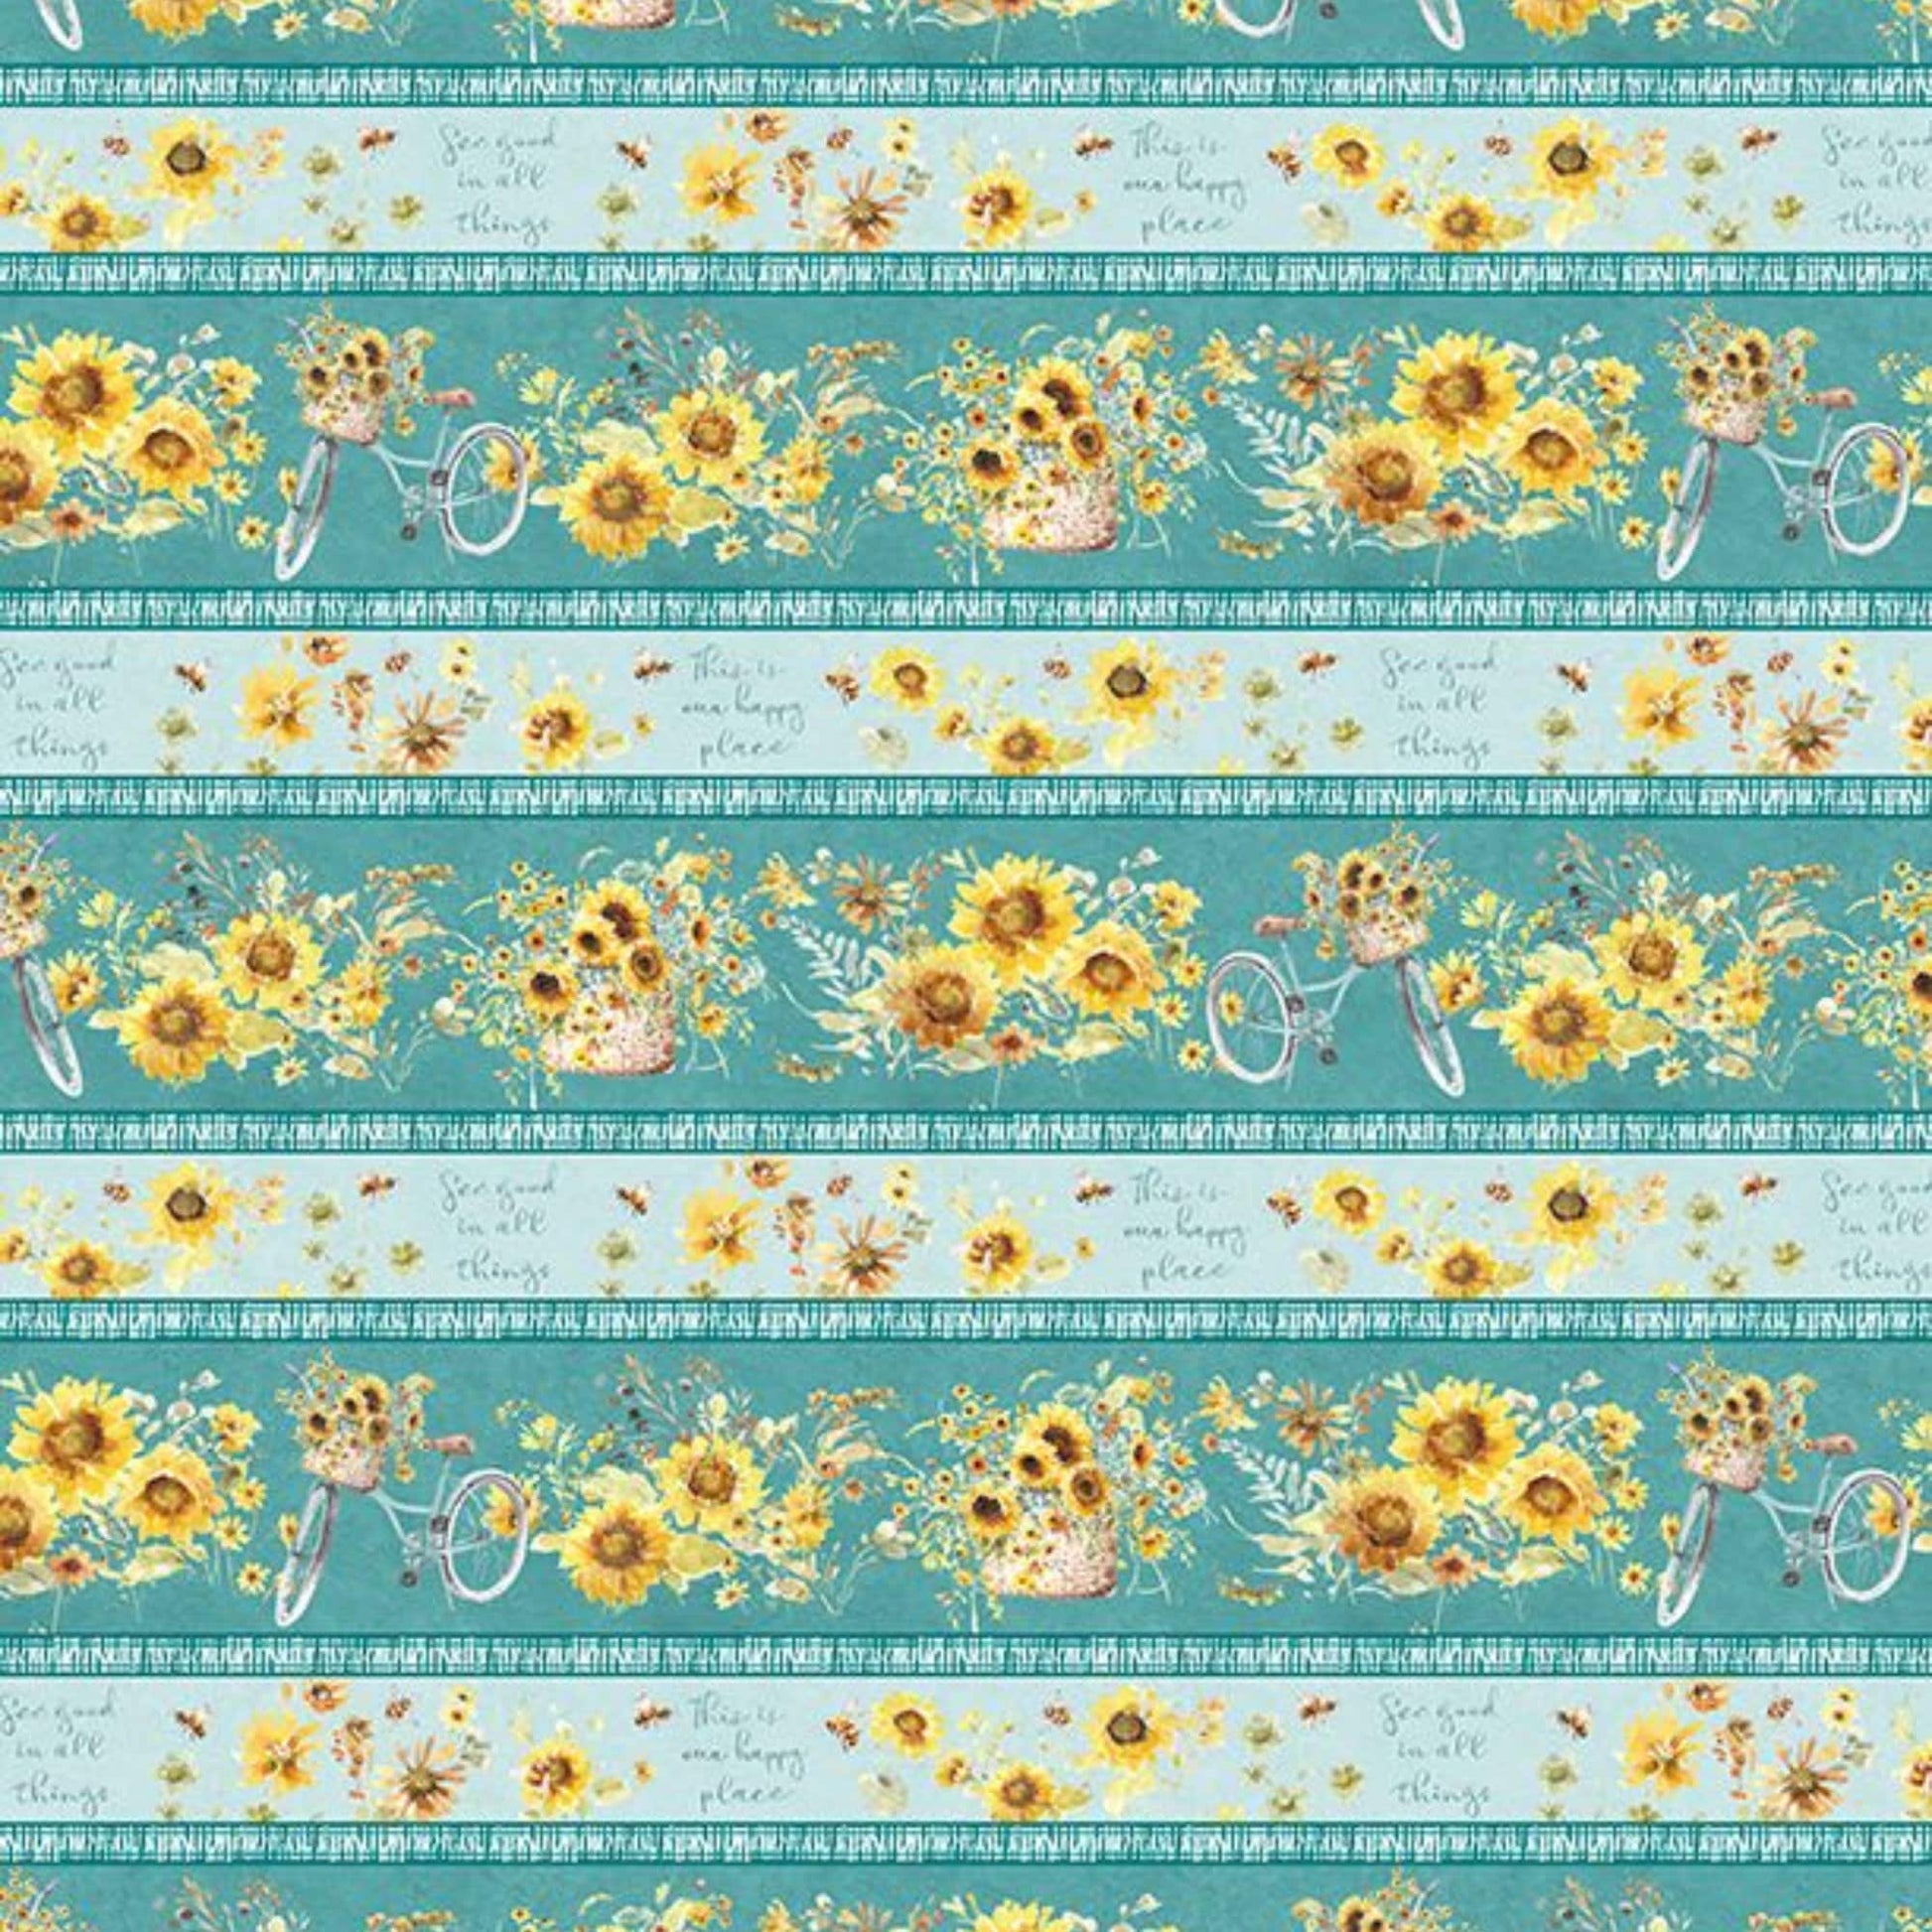 Wilmington Prints Repeating Stripe / FQ (18"x21") Light Teal Gingham, Leaf Texture Teal or Repeating Stripe Fabric by the Yard from Wilmington Prints Sunflower Sweet by Lisa Audit